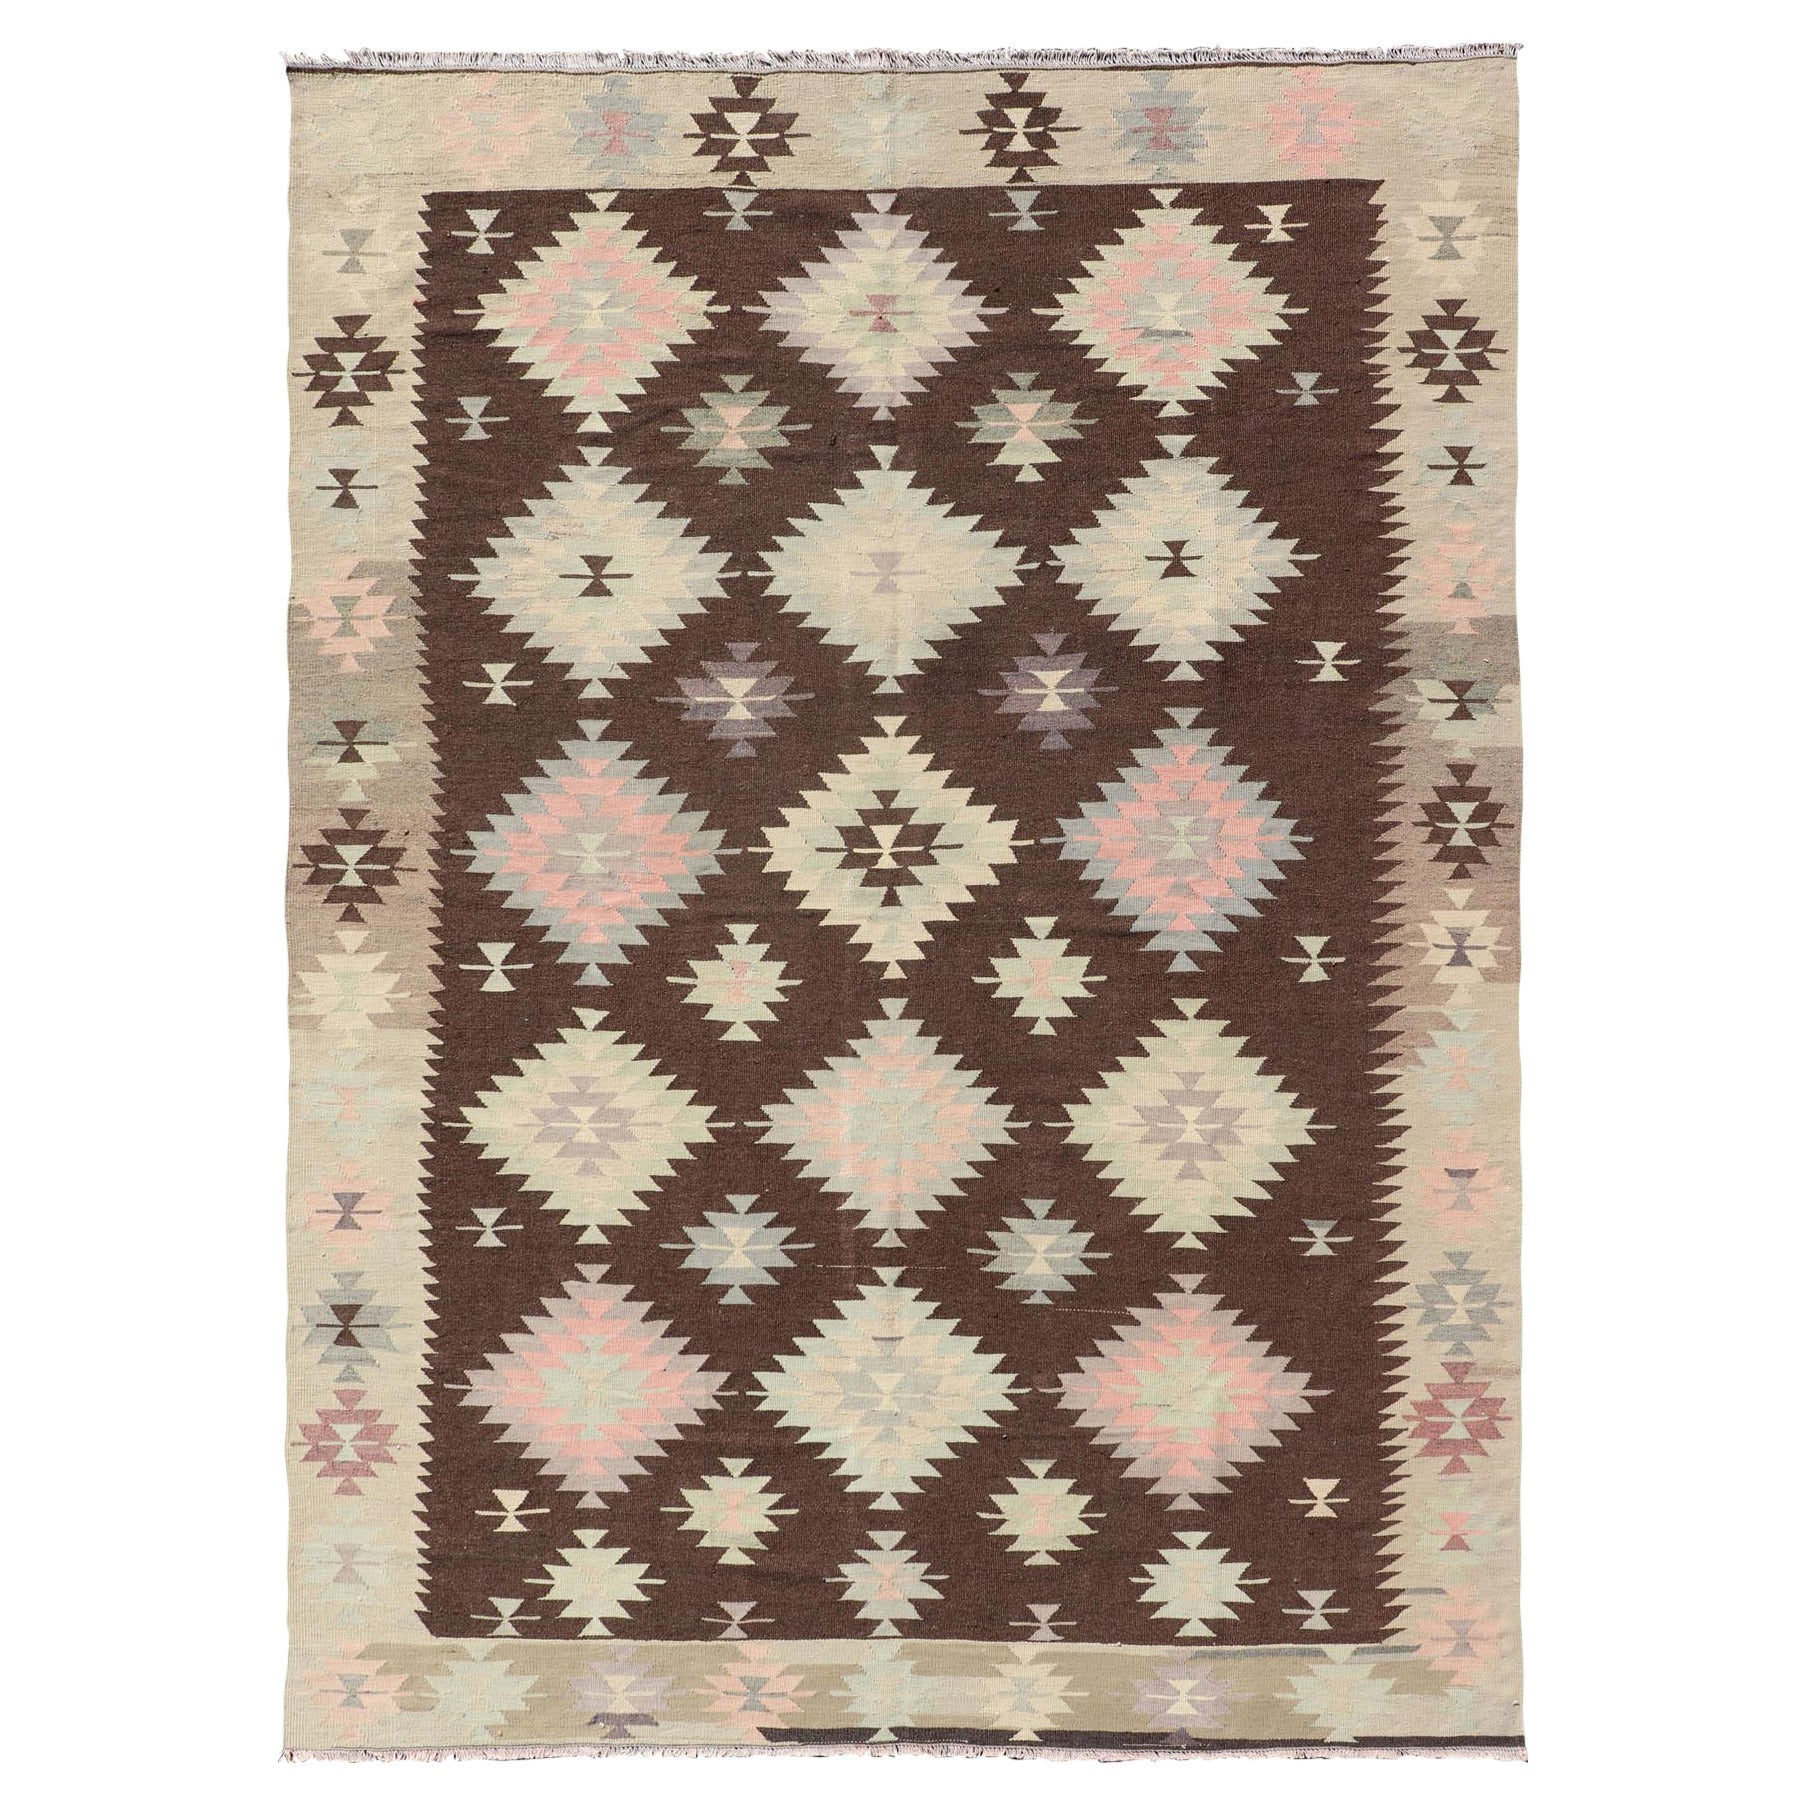 Tribal and Geometrics Turkish Kilim in Brown with Cream, Pink, Light Gray/Blue For Sale